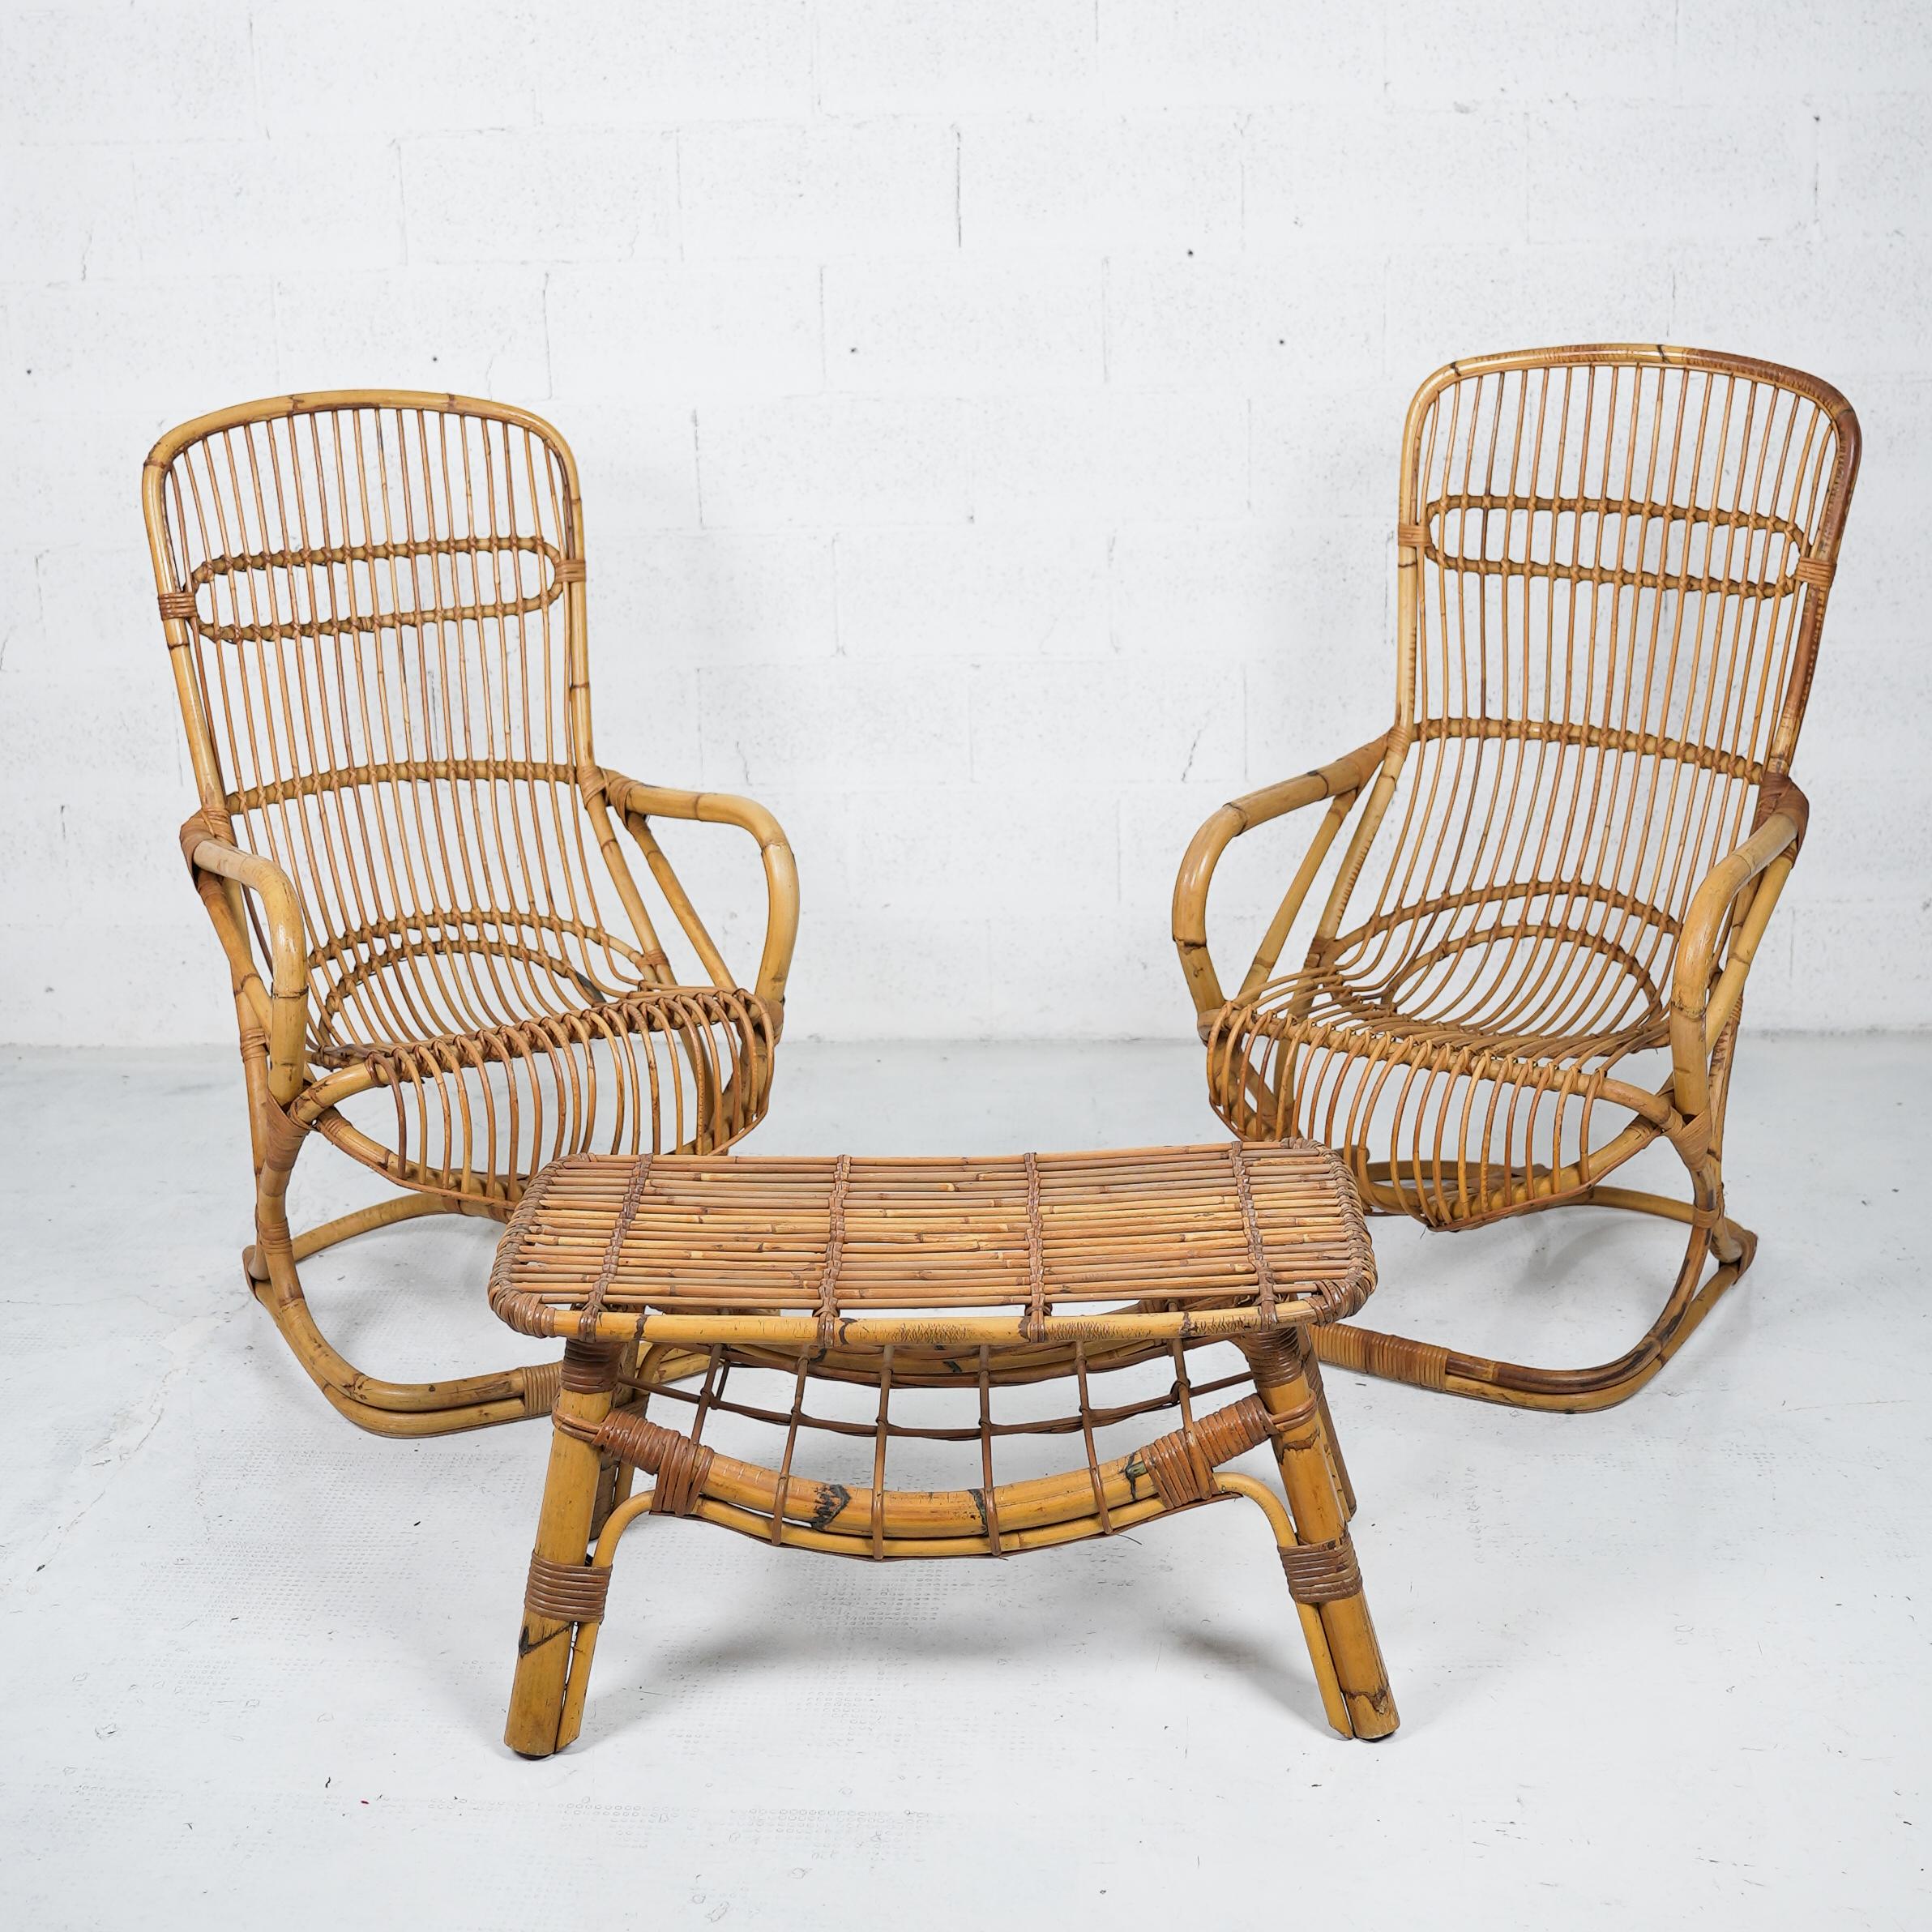 Set of 2 armchairs and a coffee table in wicker bamboo rattan and natural rattan.
This beautiful set is in excellent condition in all its parts and carries some traces of time that make it even more warm and fascinating.
Perfect for outdoors,